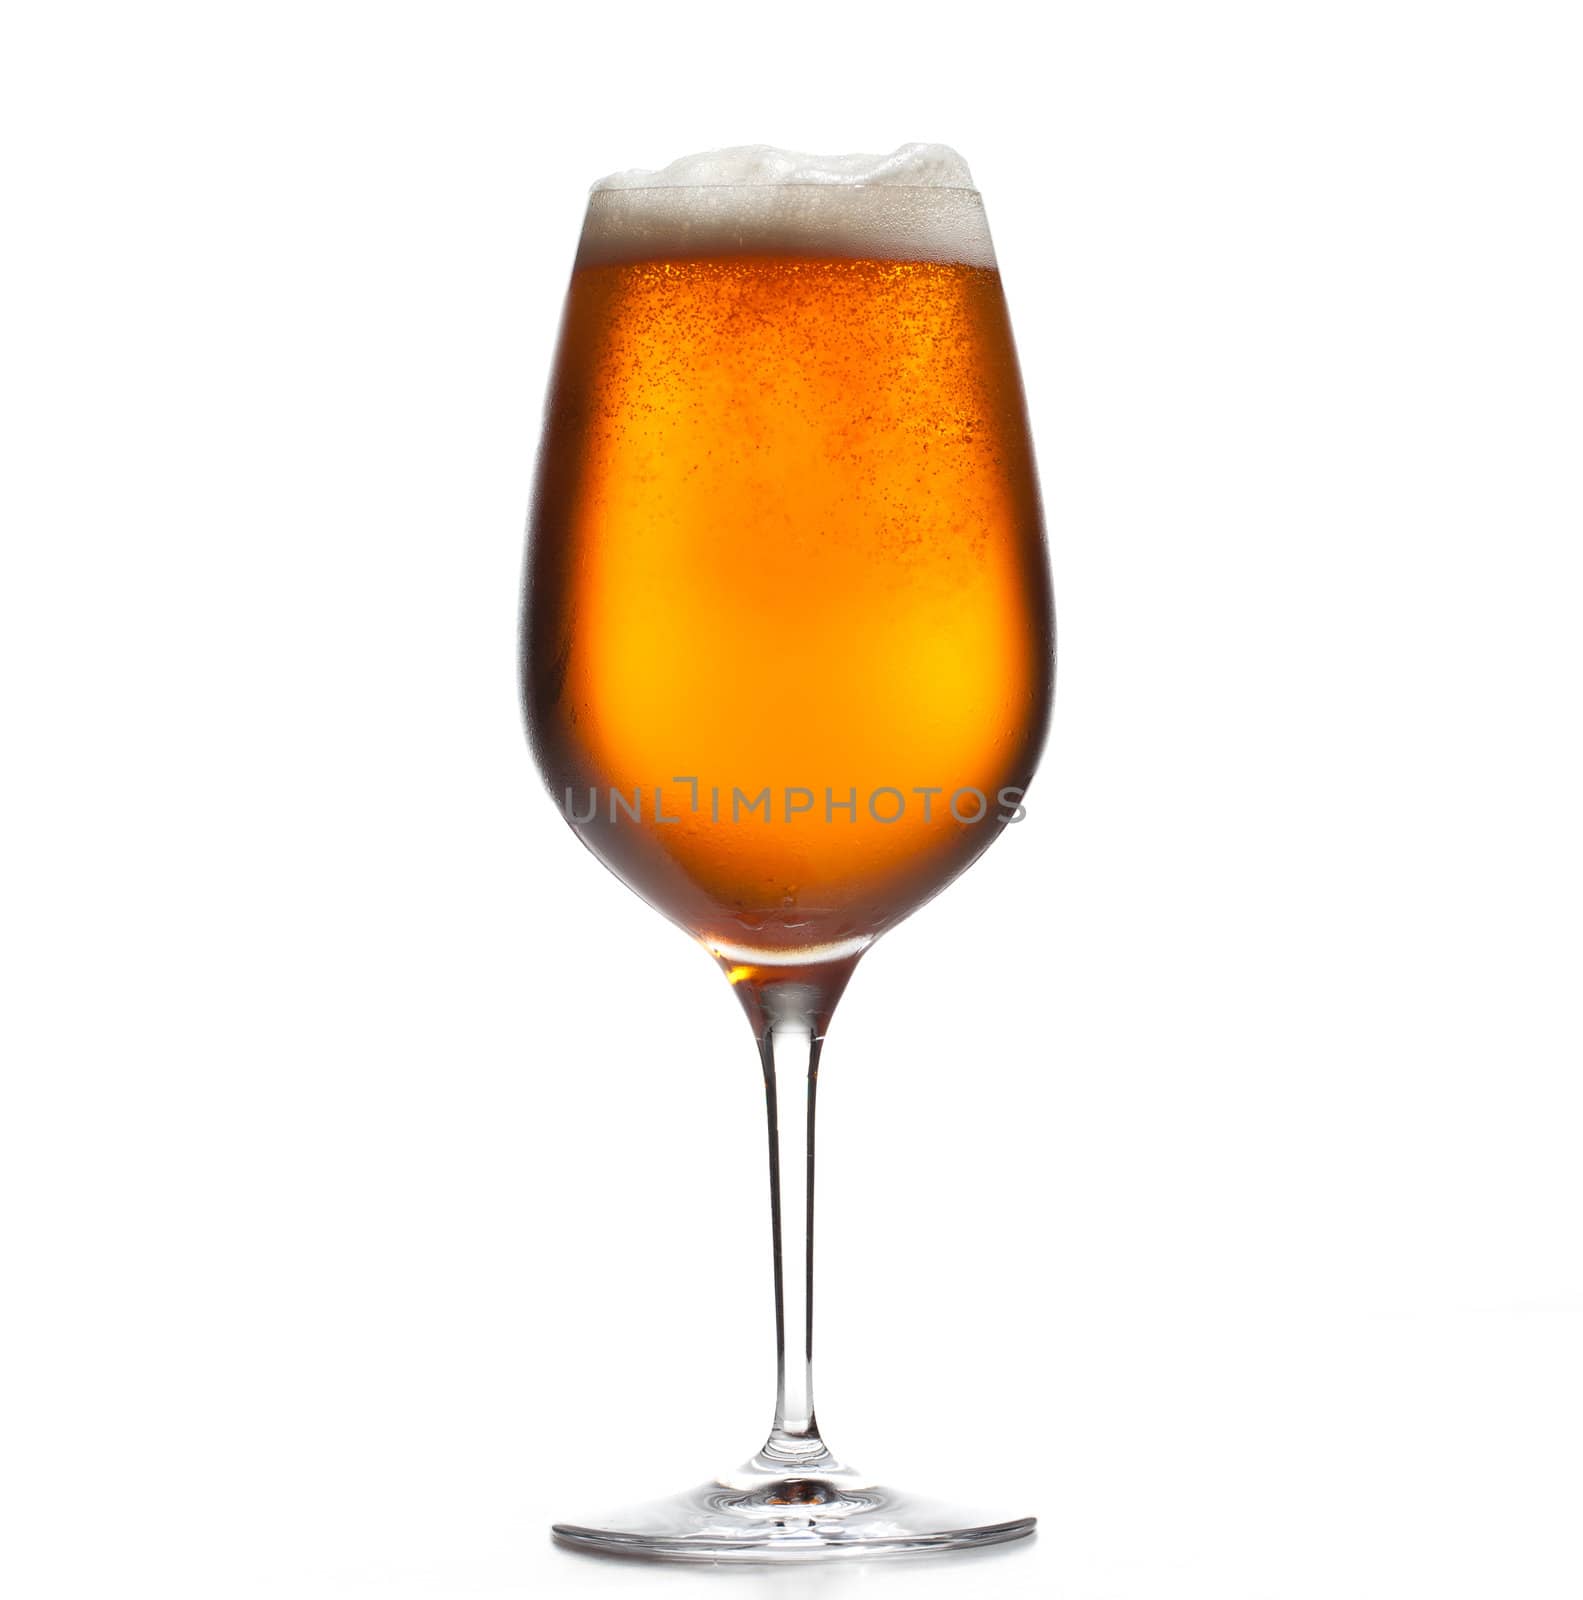 Chilled isolated wine goblet with small droplets of condensation on the outside of the glass and filled with golden colored beer